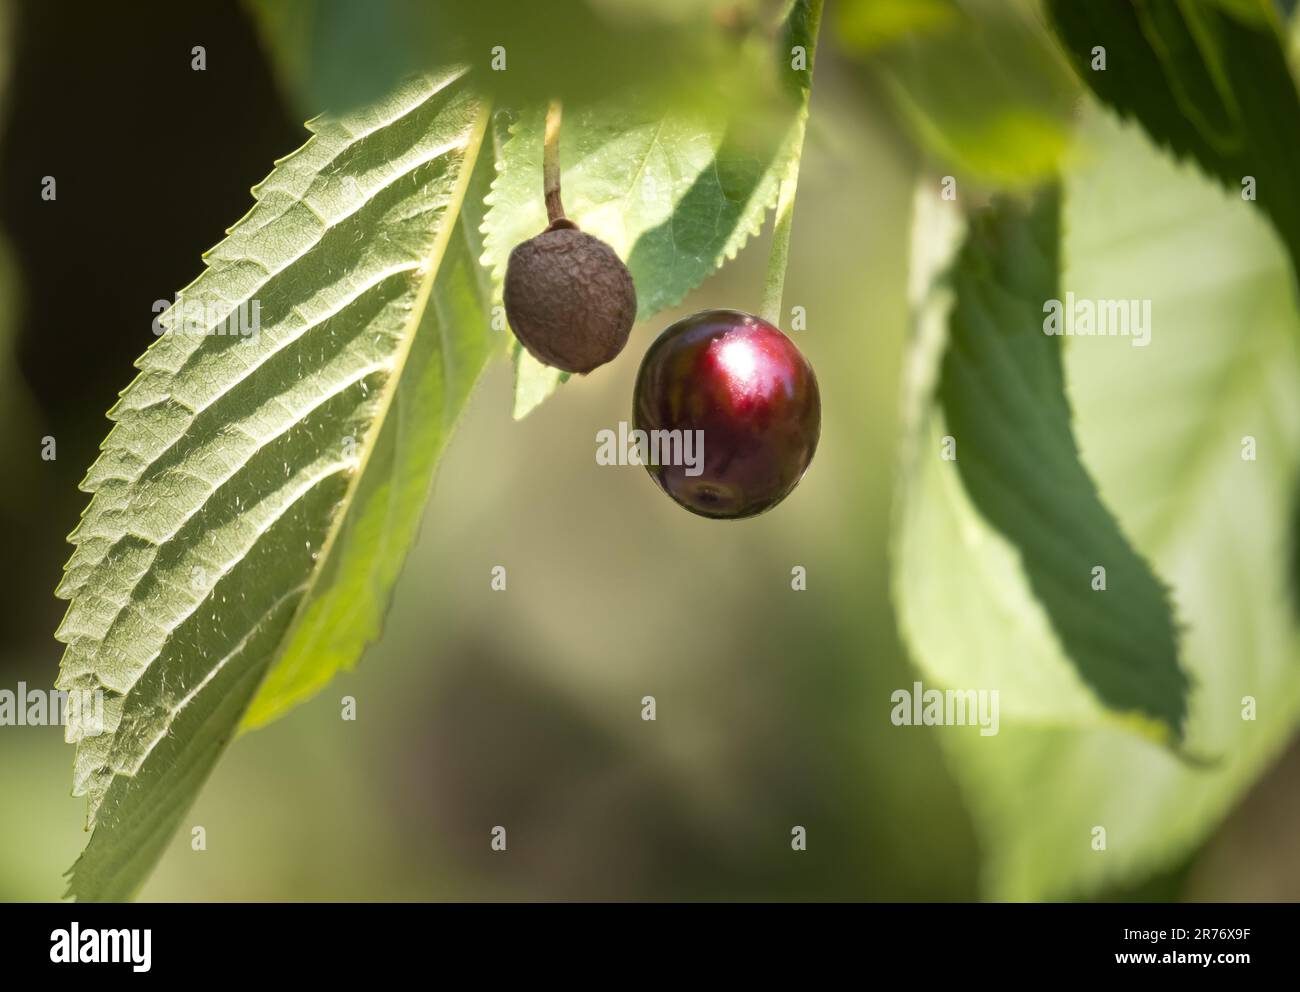 A shiny, ripe black cherry, Prunus serotina, shining in the sunlight beside a black cherry pit and surrounded by lush green leaves in spring or summer Stock Photo